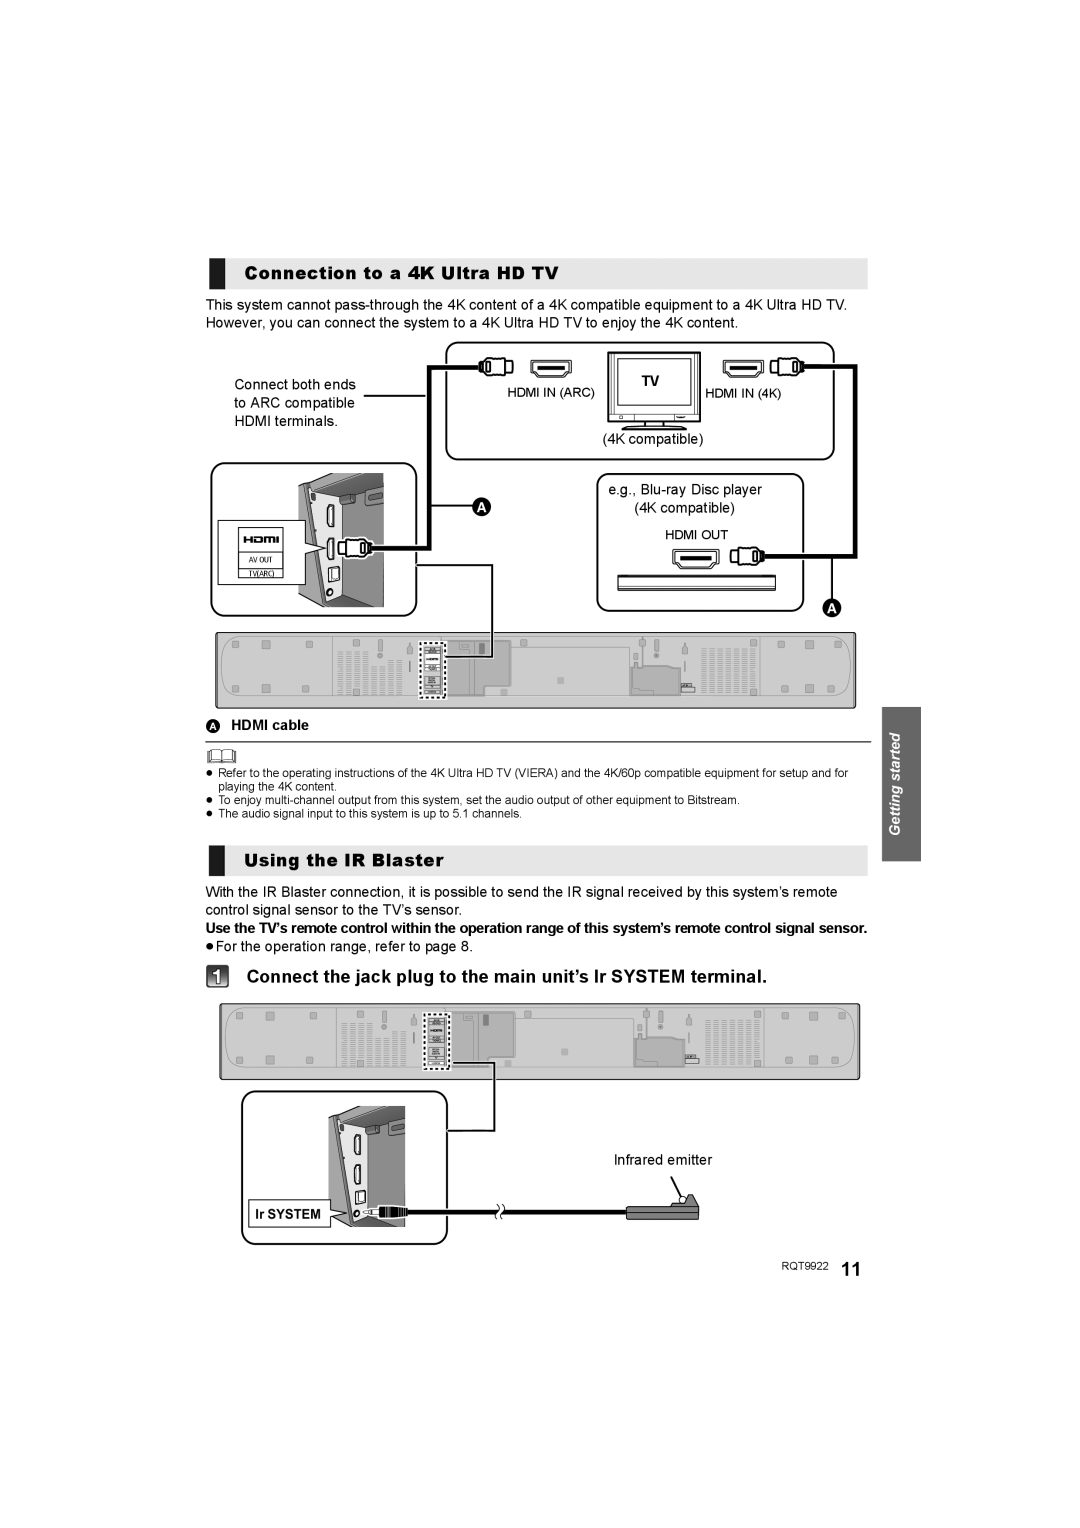 Panasonic SC-HTB580 owner manual Connection to a 4K Ultra HD TV, Using the IR Blaster, Getting started, AHDMI cable 